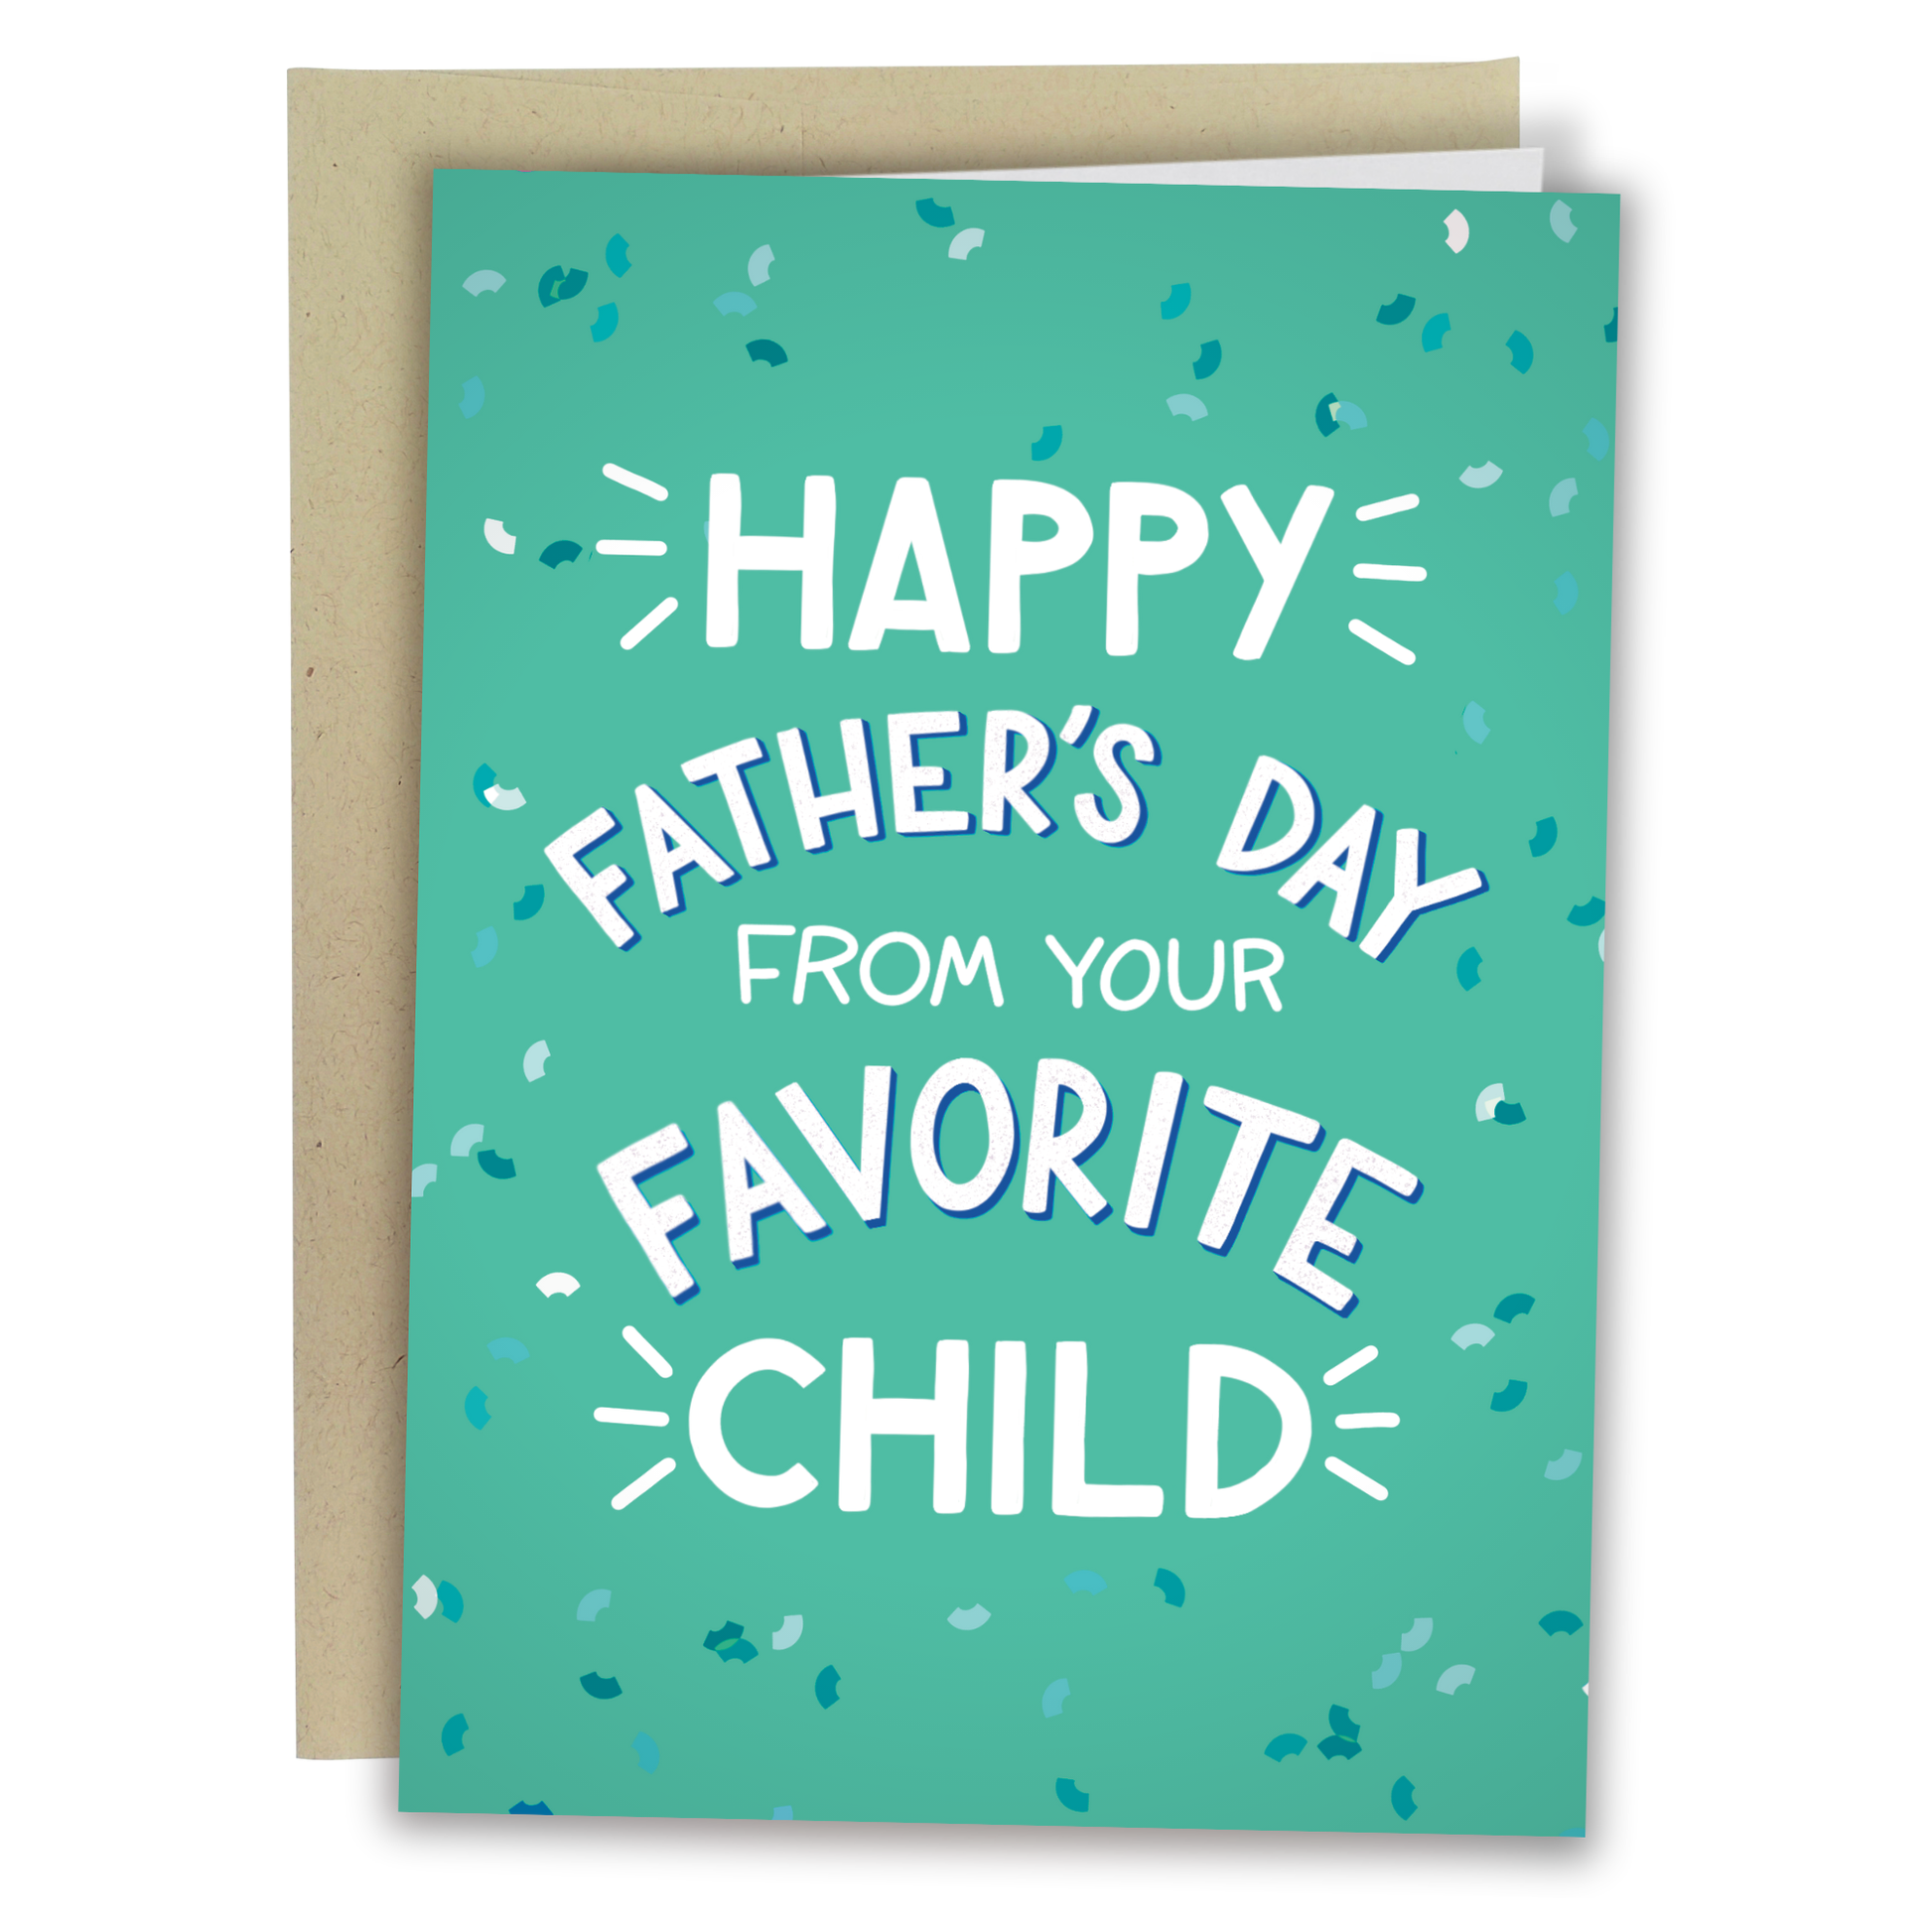 teal greeting card with white and blue confetti, white letter's that state HAPPY FATHER'S DAY FROM YOUR FAVORITE CHILD